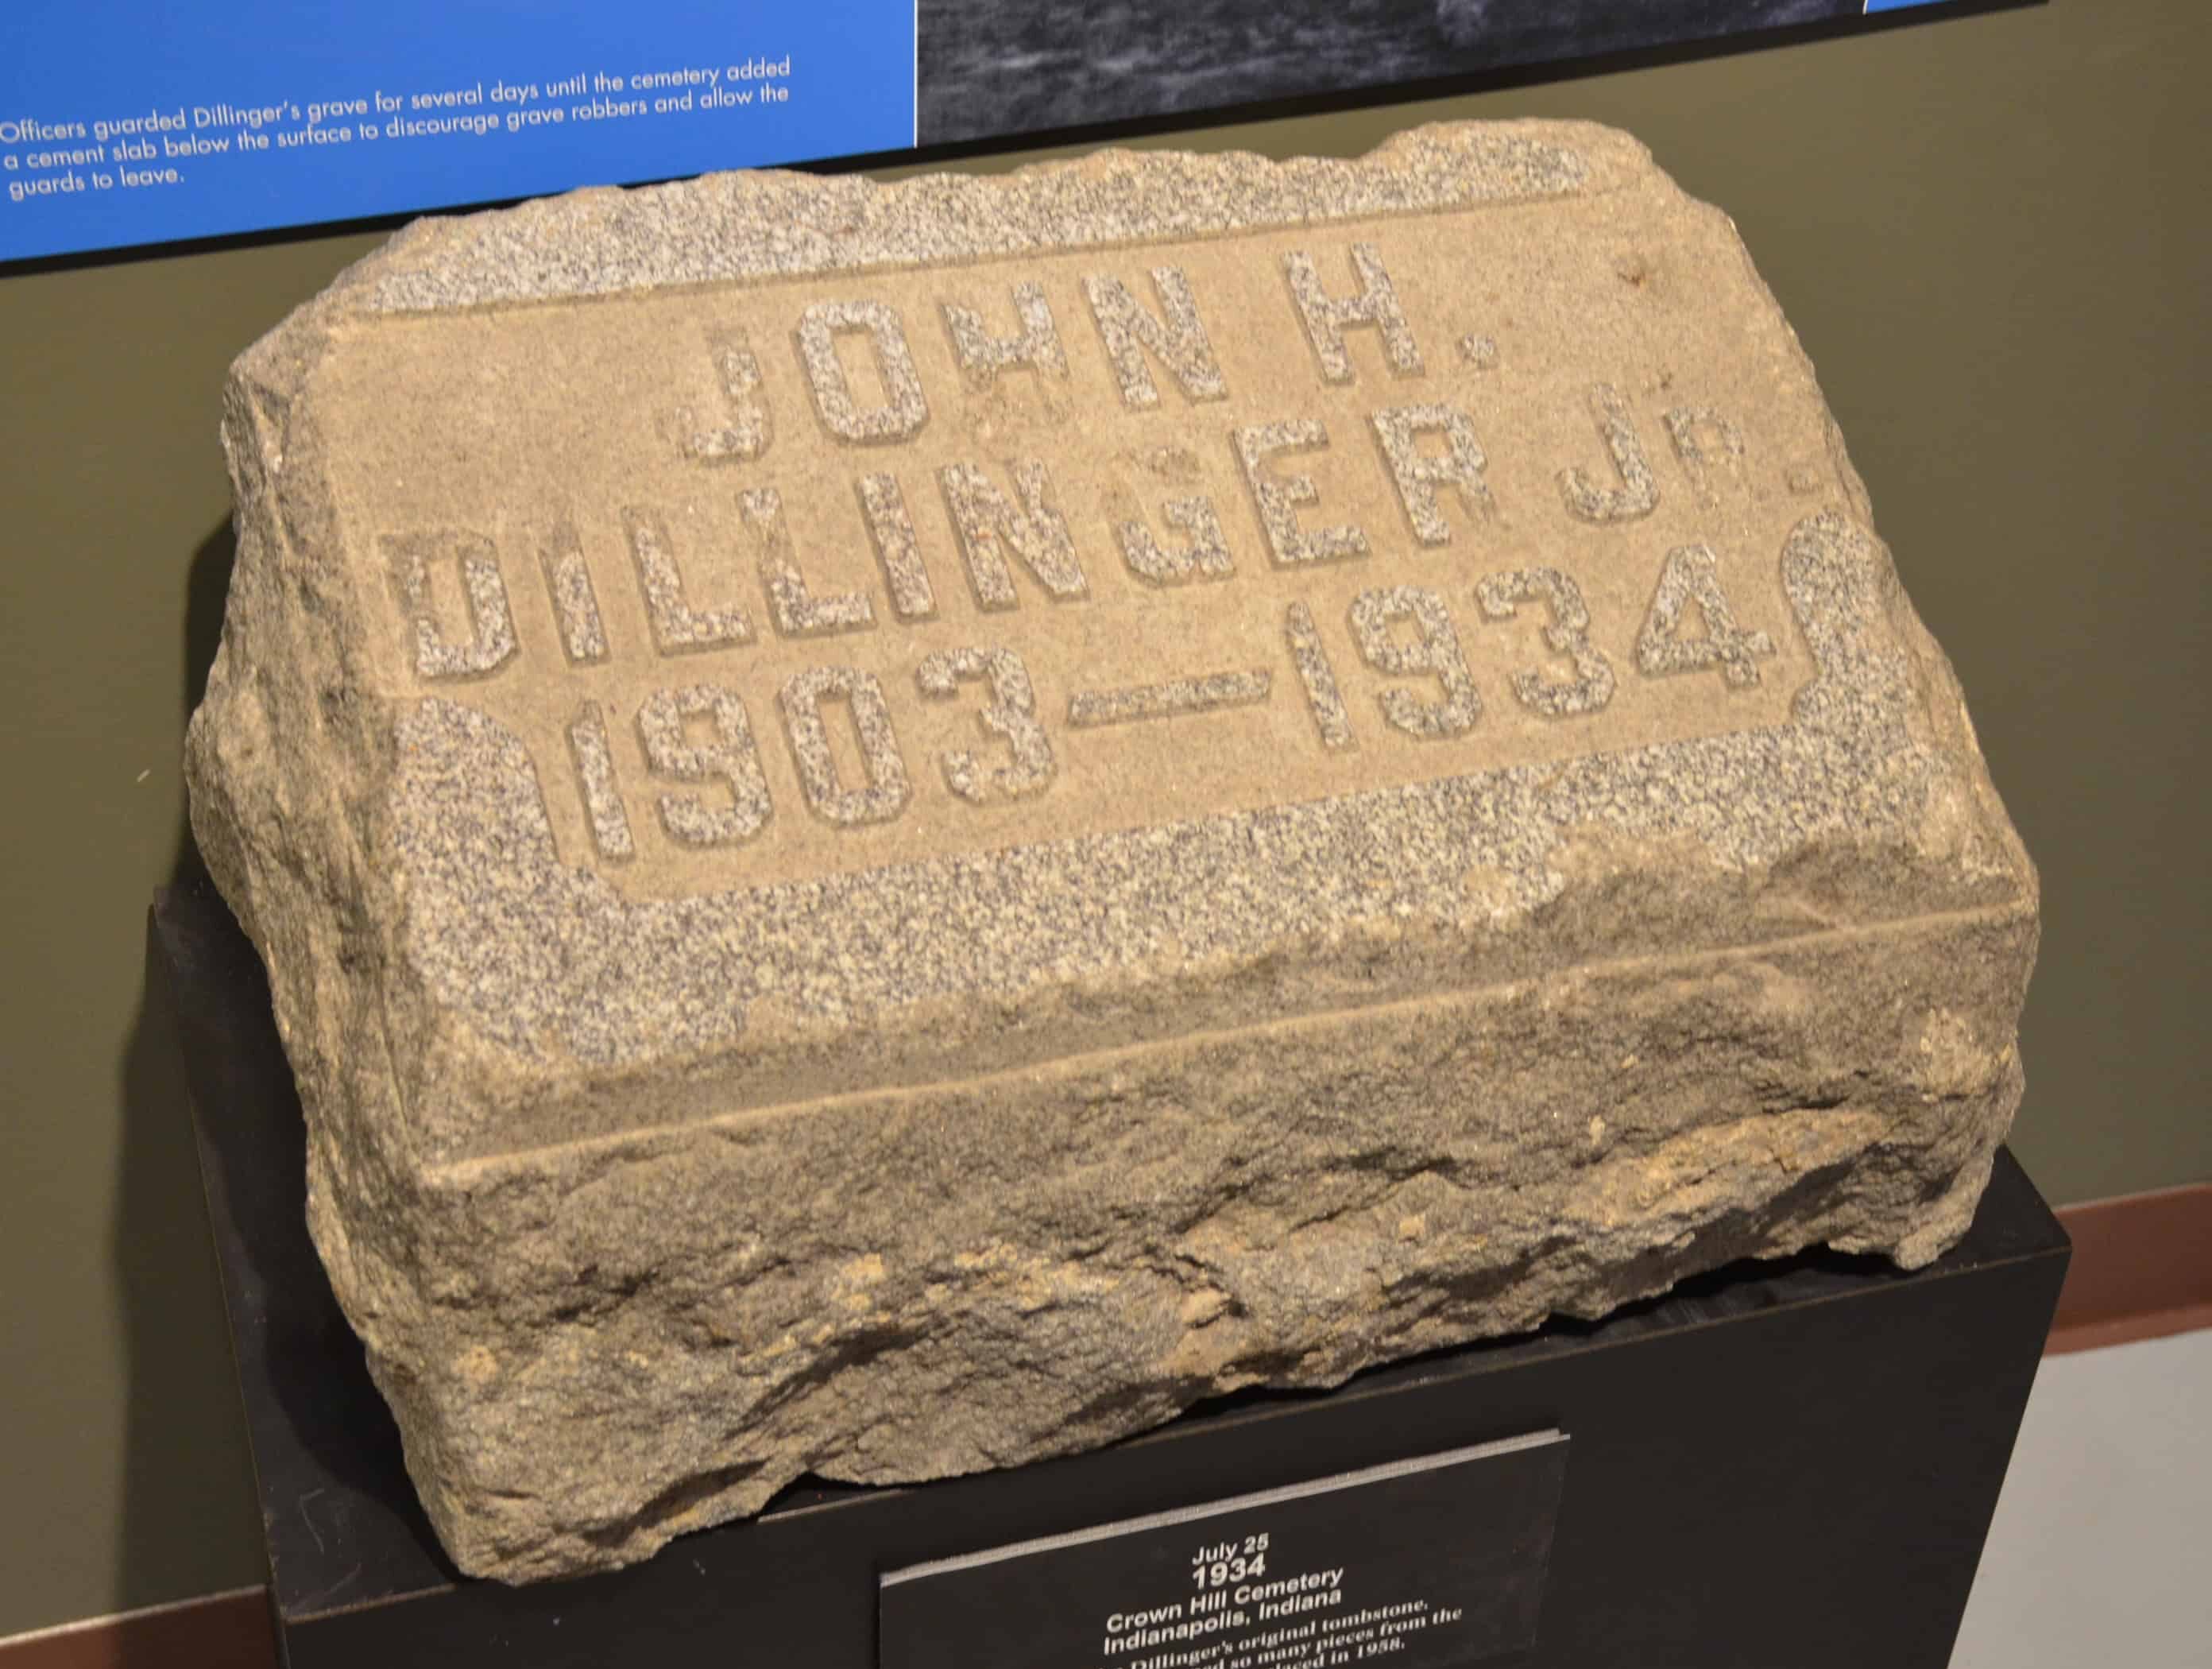 Dillinger's original tombstone at the John Dillinger Museum in Crown Point, Indiana